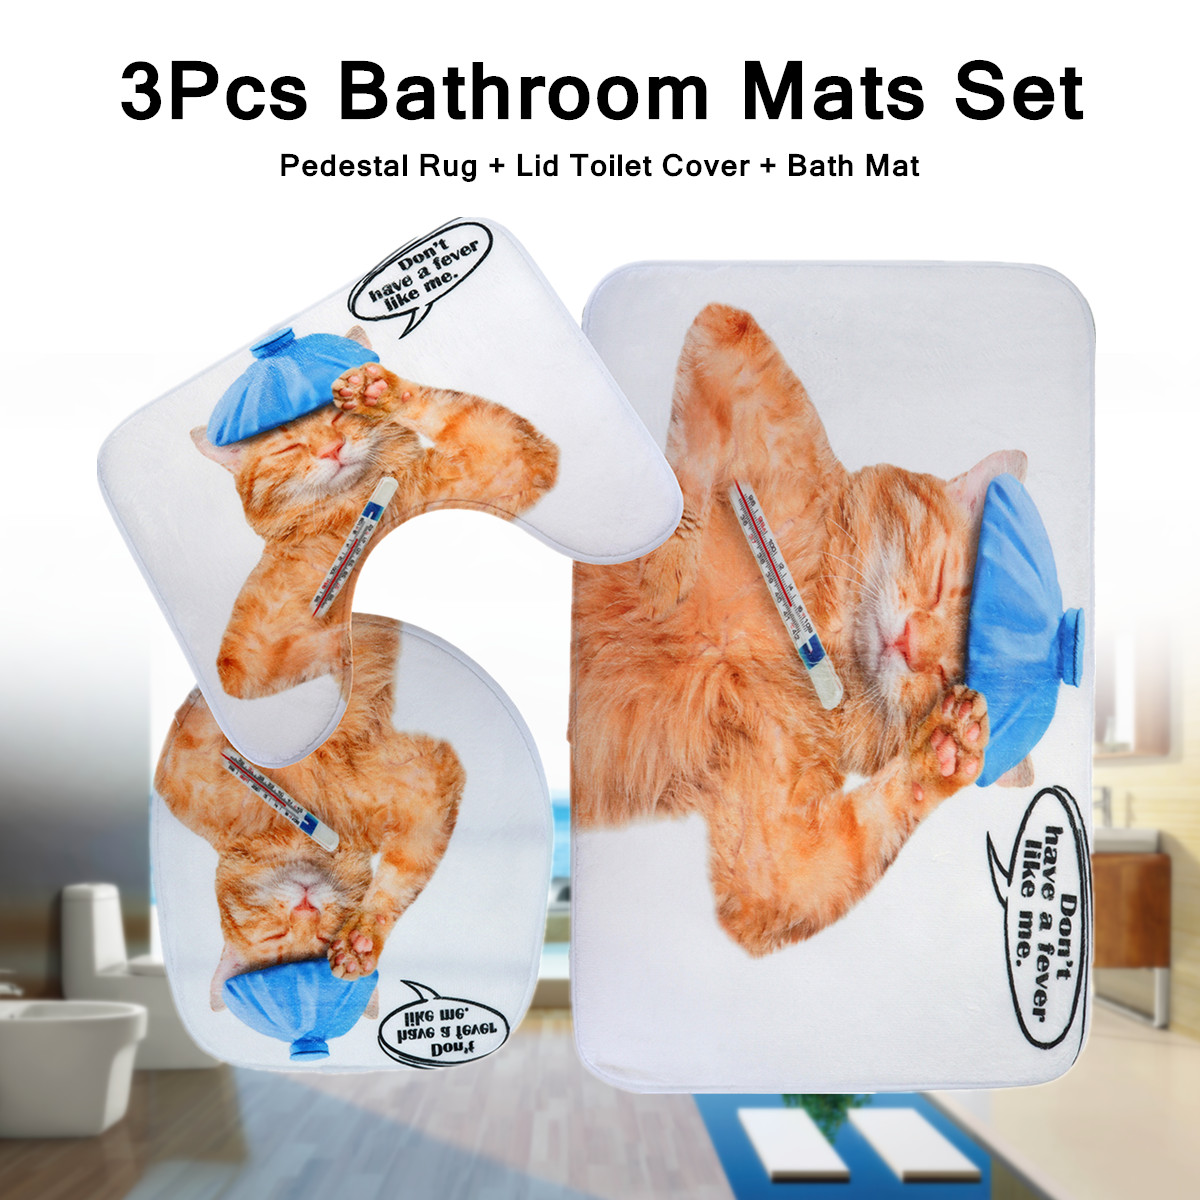 Toilet-Seat-Covers-Bathroom-Non-Slip-Thermometer-Fat-Cat-Pedestal-Rugs-Lid-Toilet-Covers-Bath-Mats-1411646-4